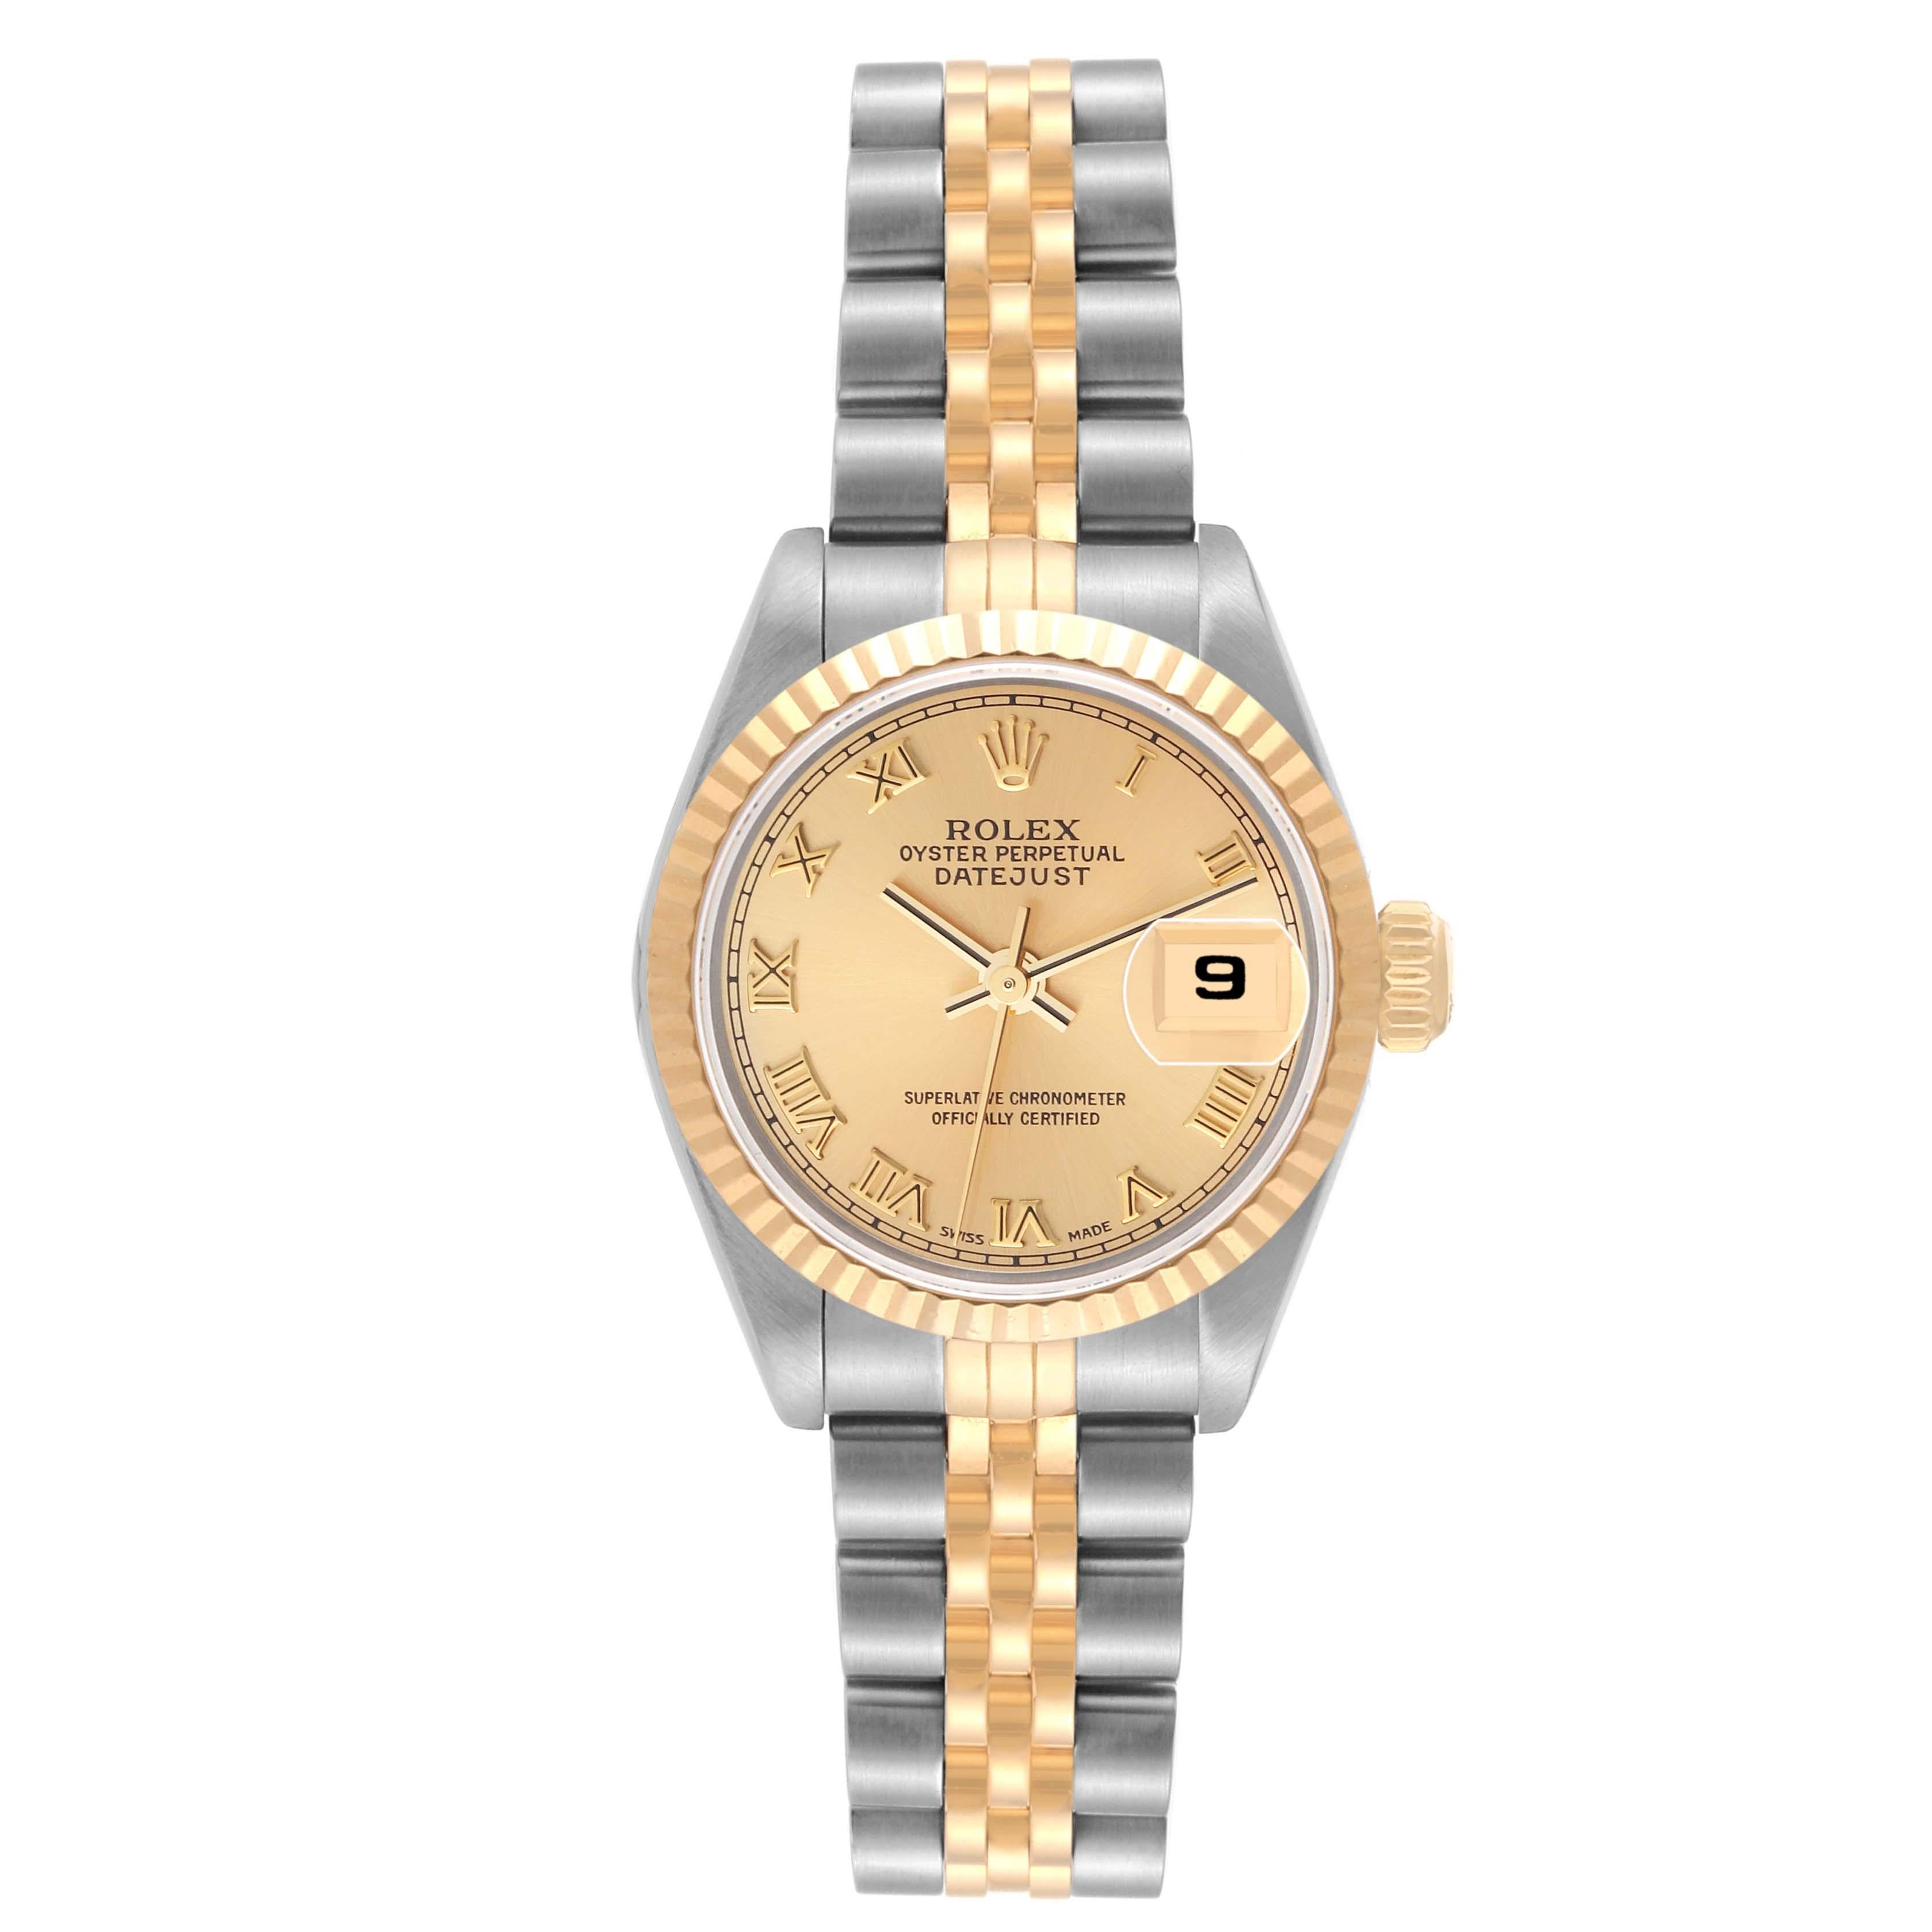 Rolex Datejust Steel Yellow Gold Champagne Dial Ladies Watch 79173. Officially certified chronometer automatic self-winding movement. Stainless steel oyster case 26.0 mm in diameter. Rolex logo on an 18K yellow gold crown. 18k yellow gold fluted